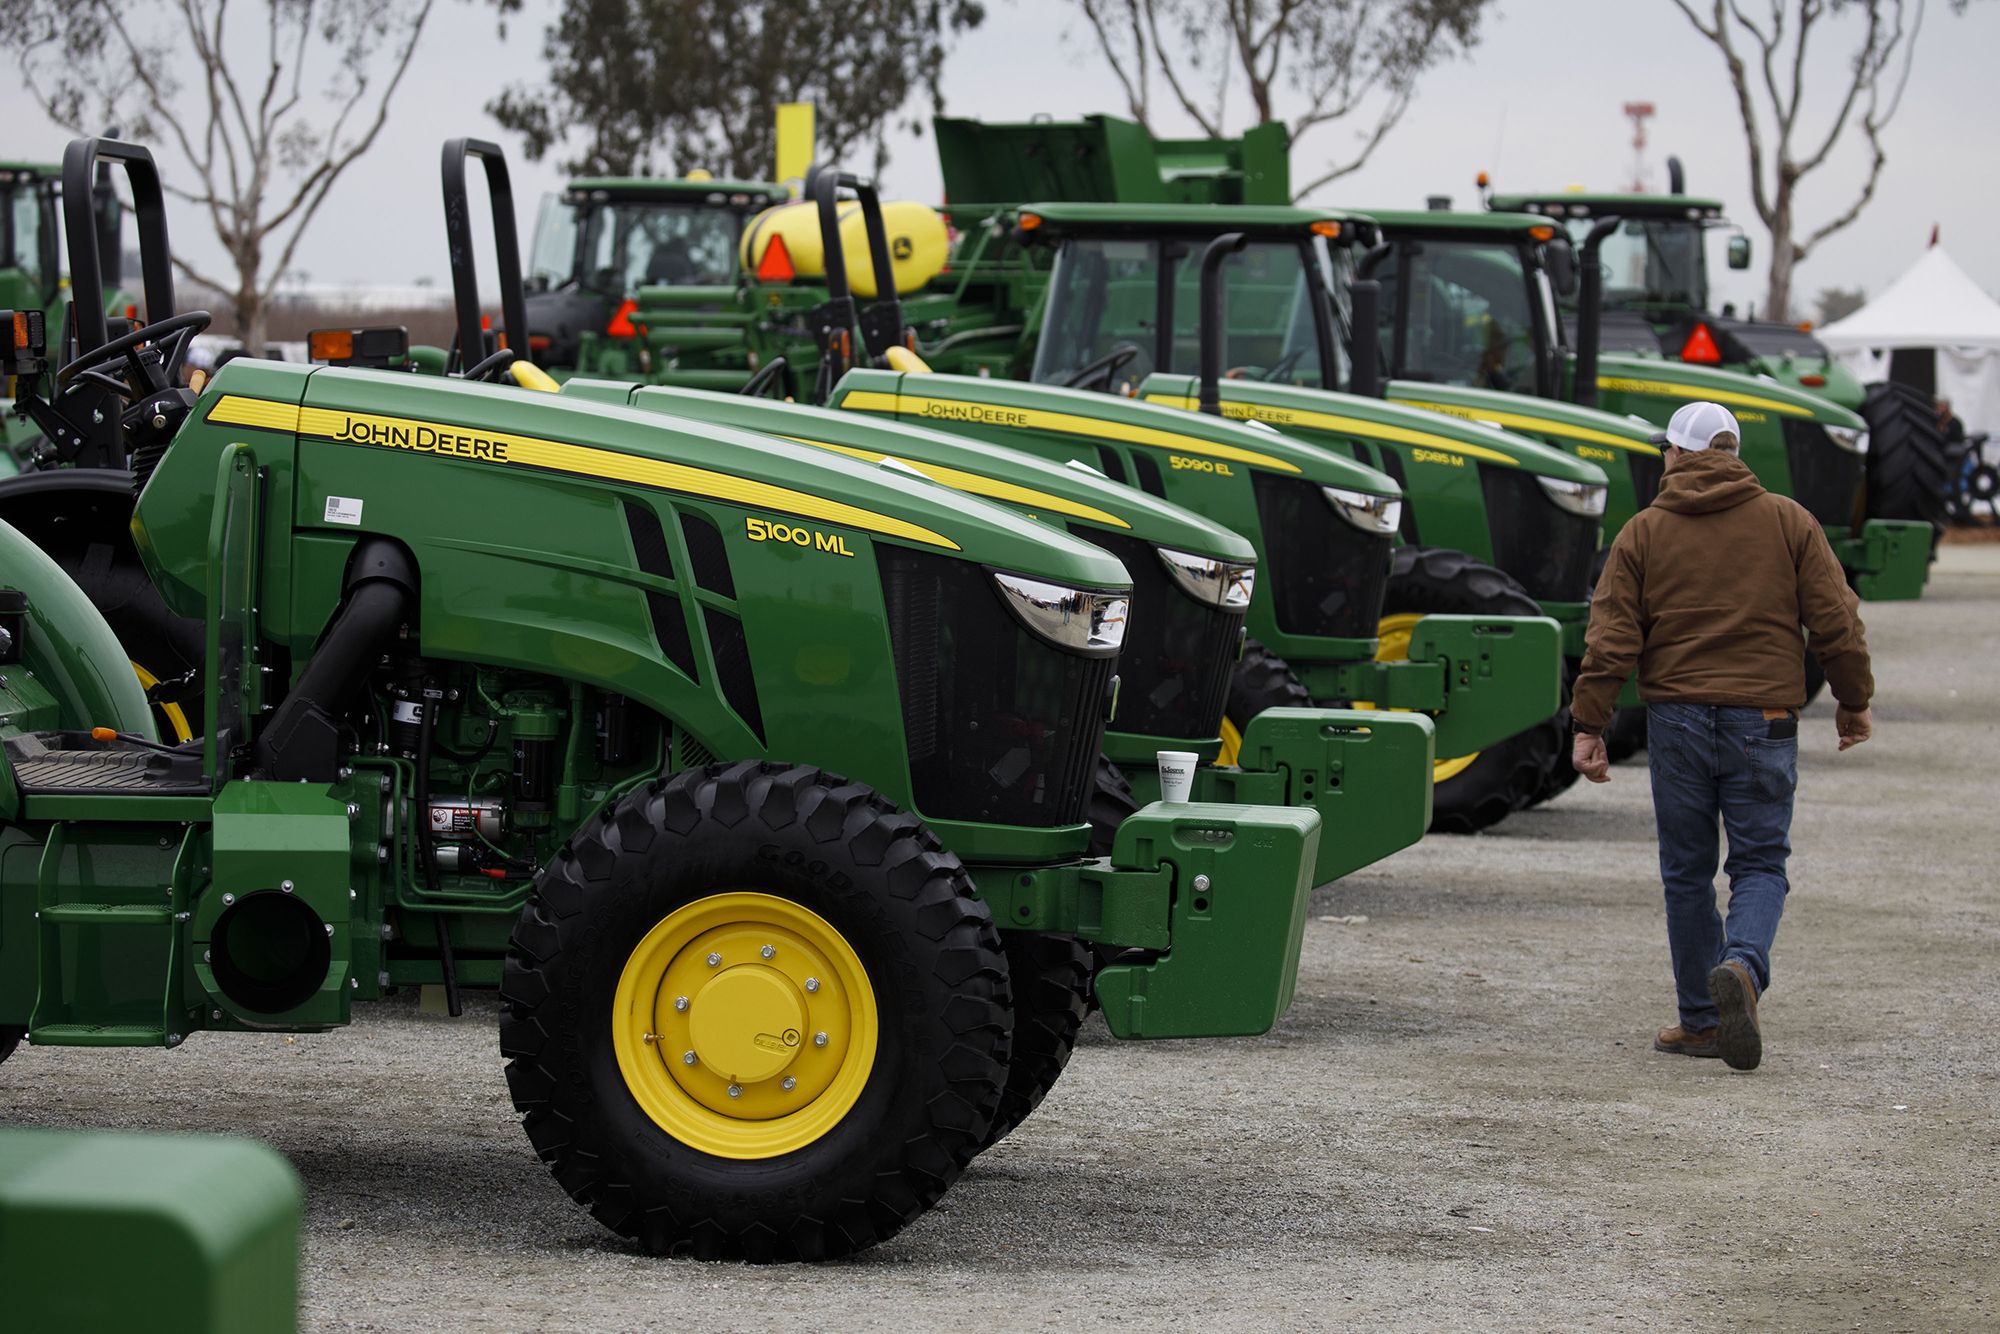 Deere gives farmers long-sought ability to repair their own